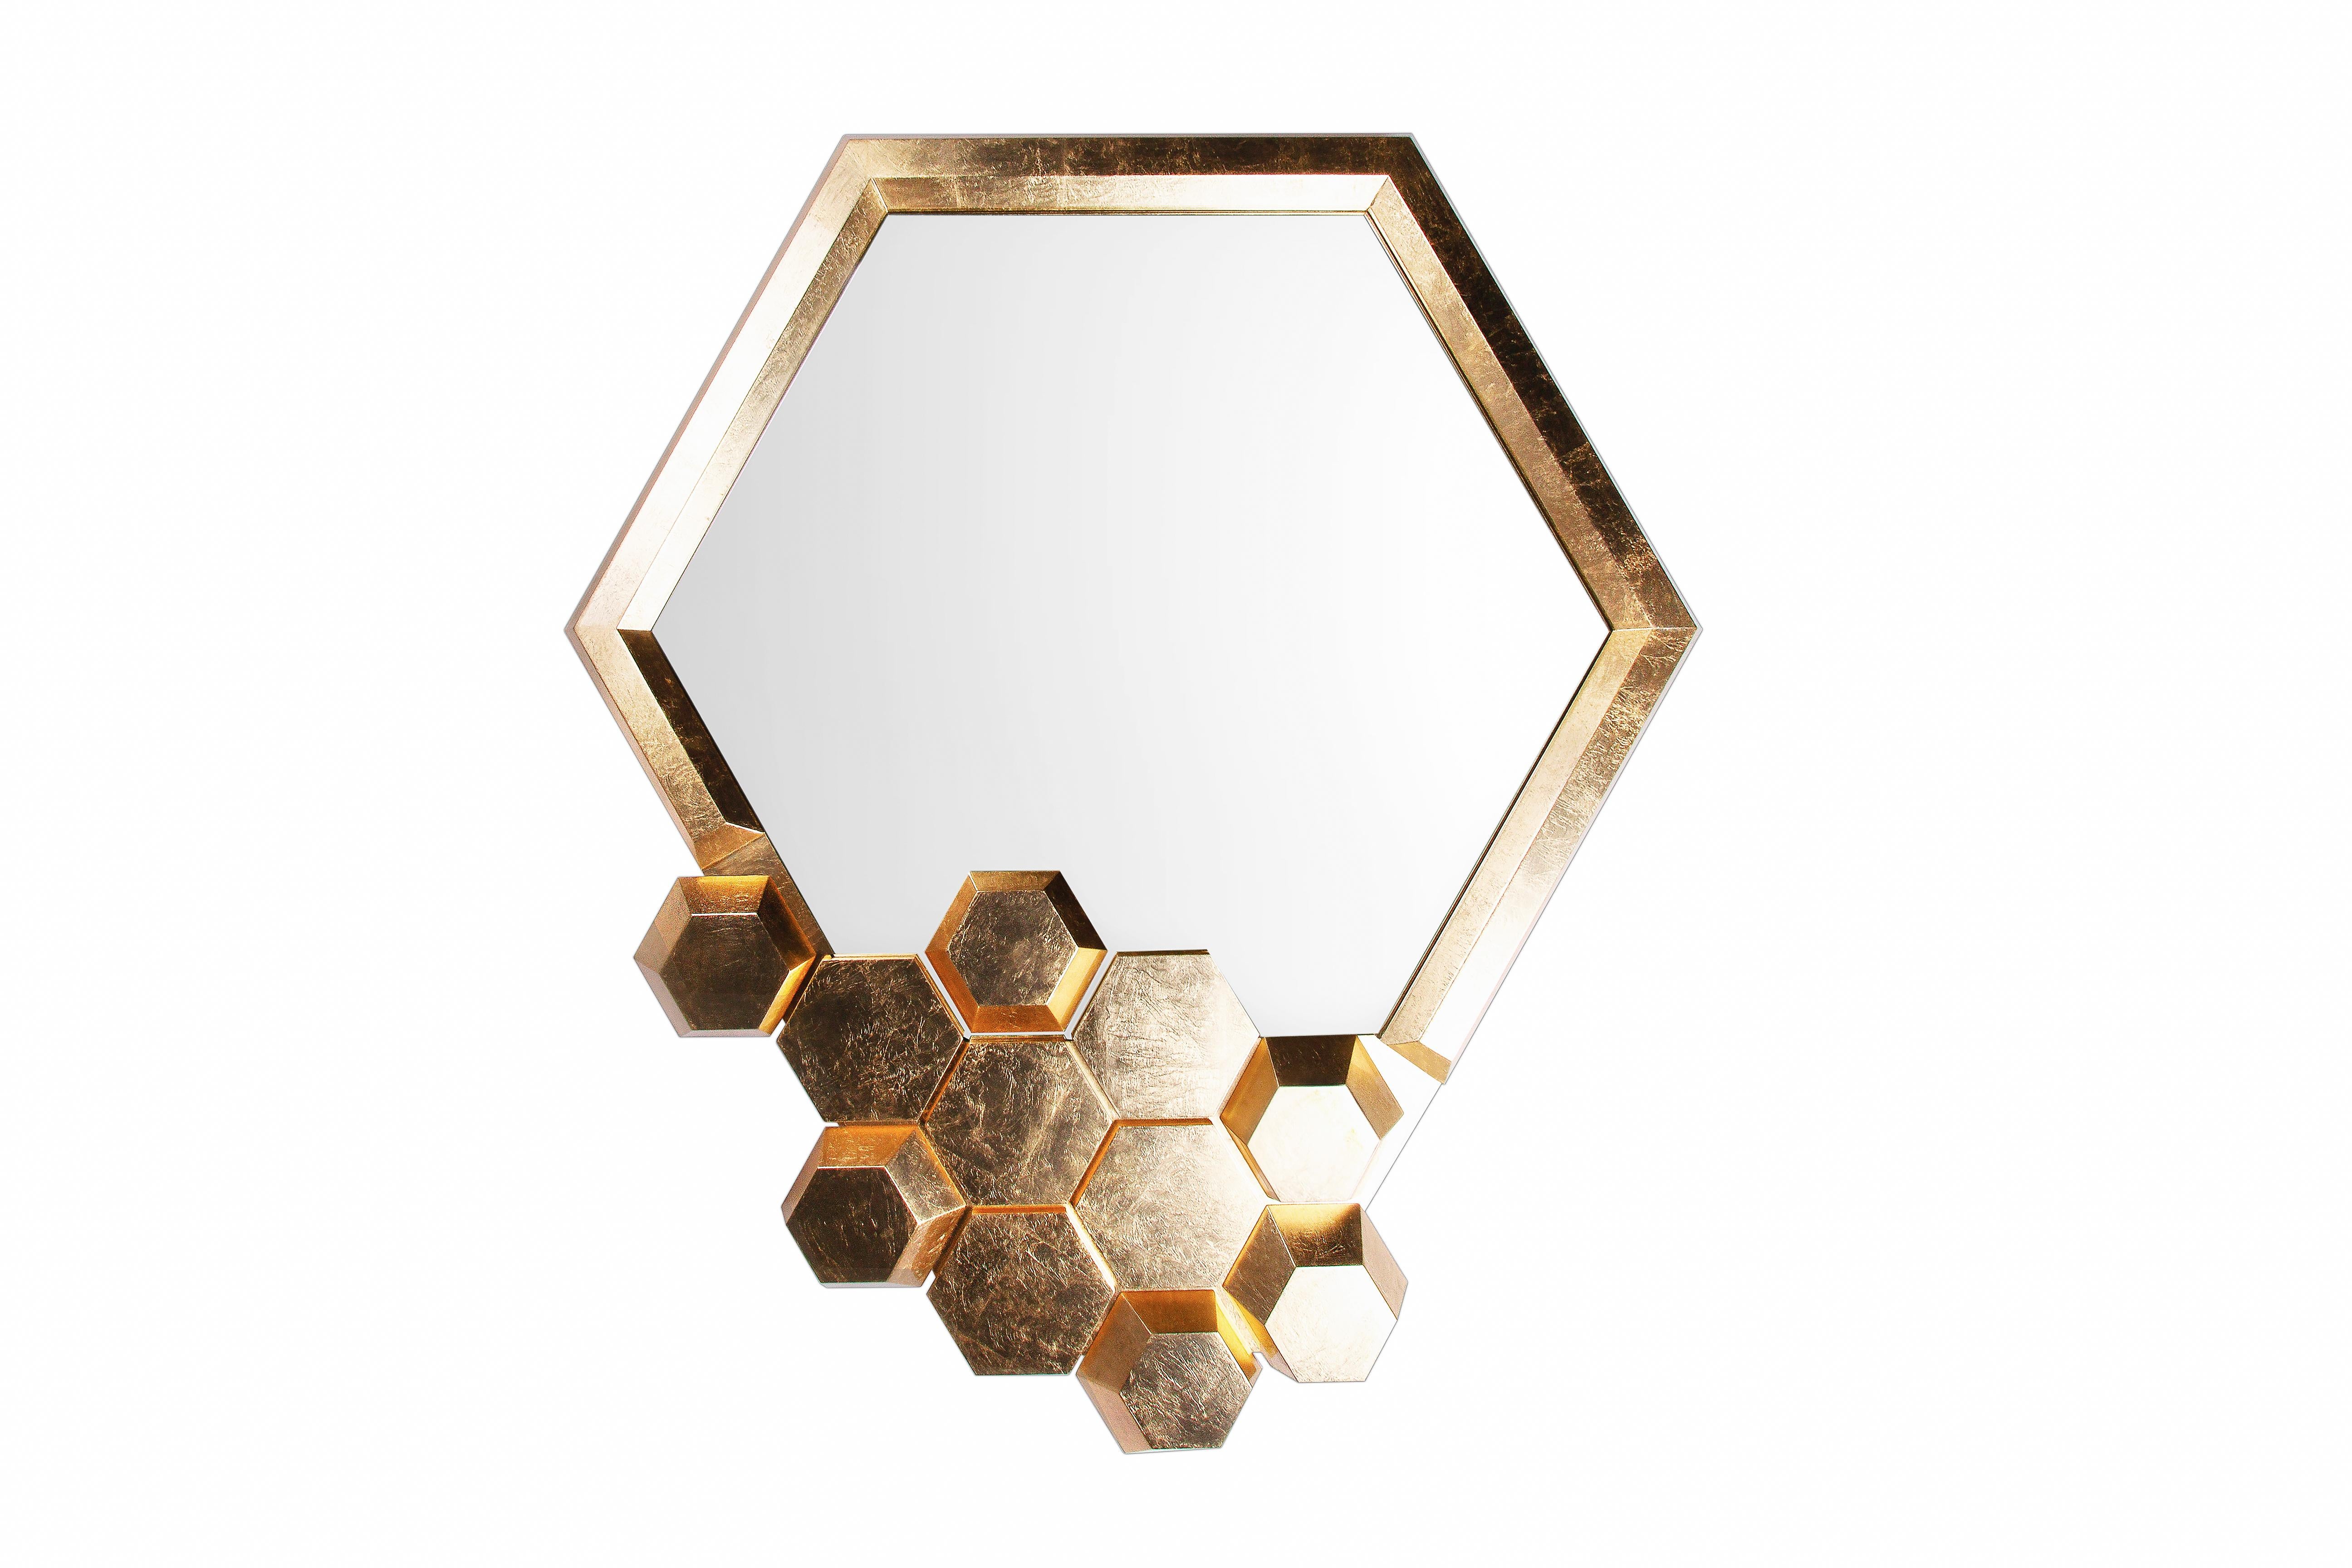 Honeycomb Limited Edition wall mirror, Royal Stranger
Dimensions: 177 x 7 x 152 cm
Materials: Polished brass structure standing on the top of a Carrara marble

Like a honey filled hive on a busy spring day, the limited-edition honeycomb mirror